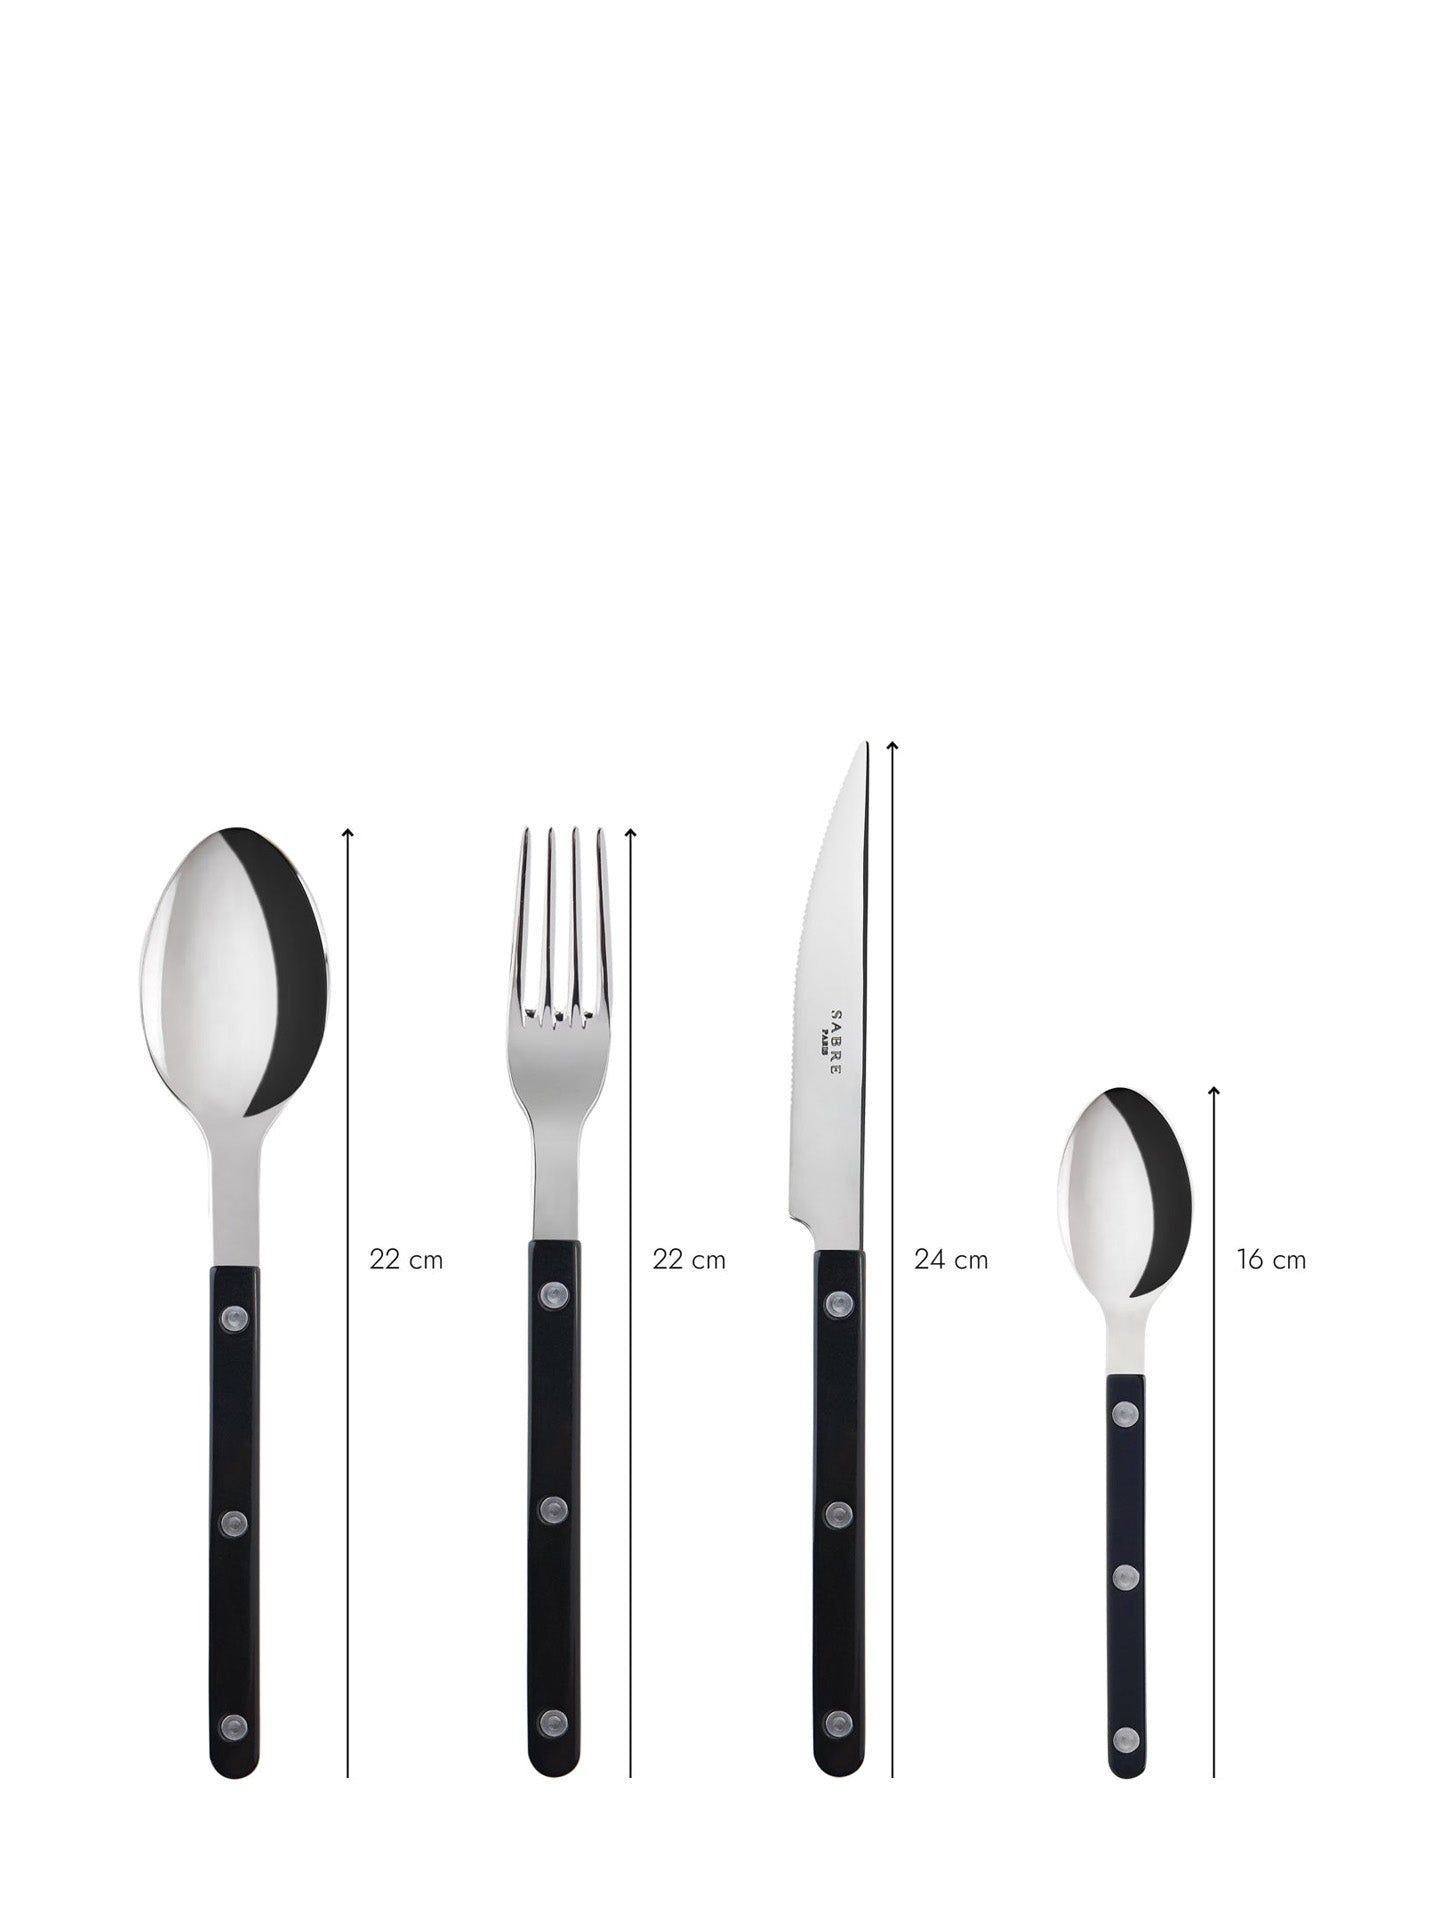 Size chart of the Bistrot cutleries